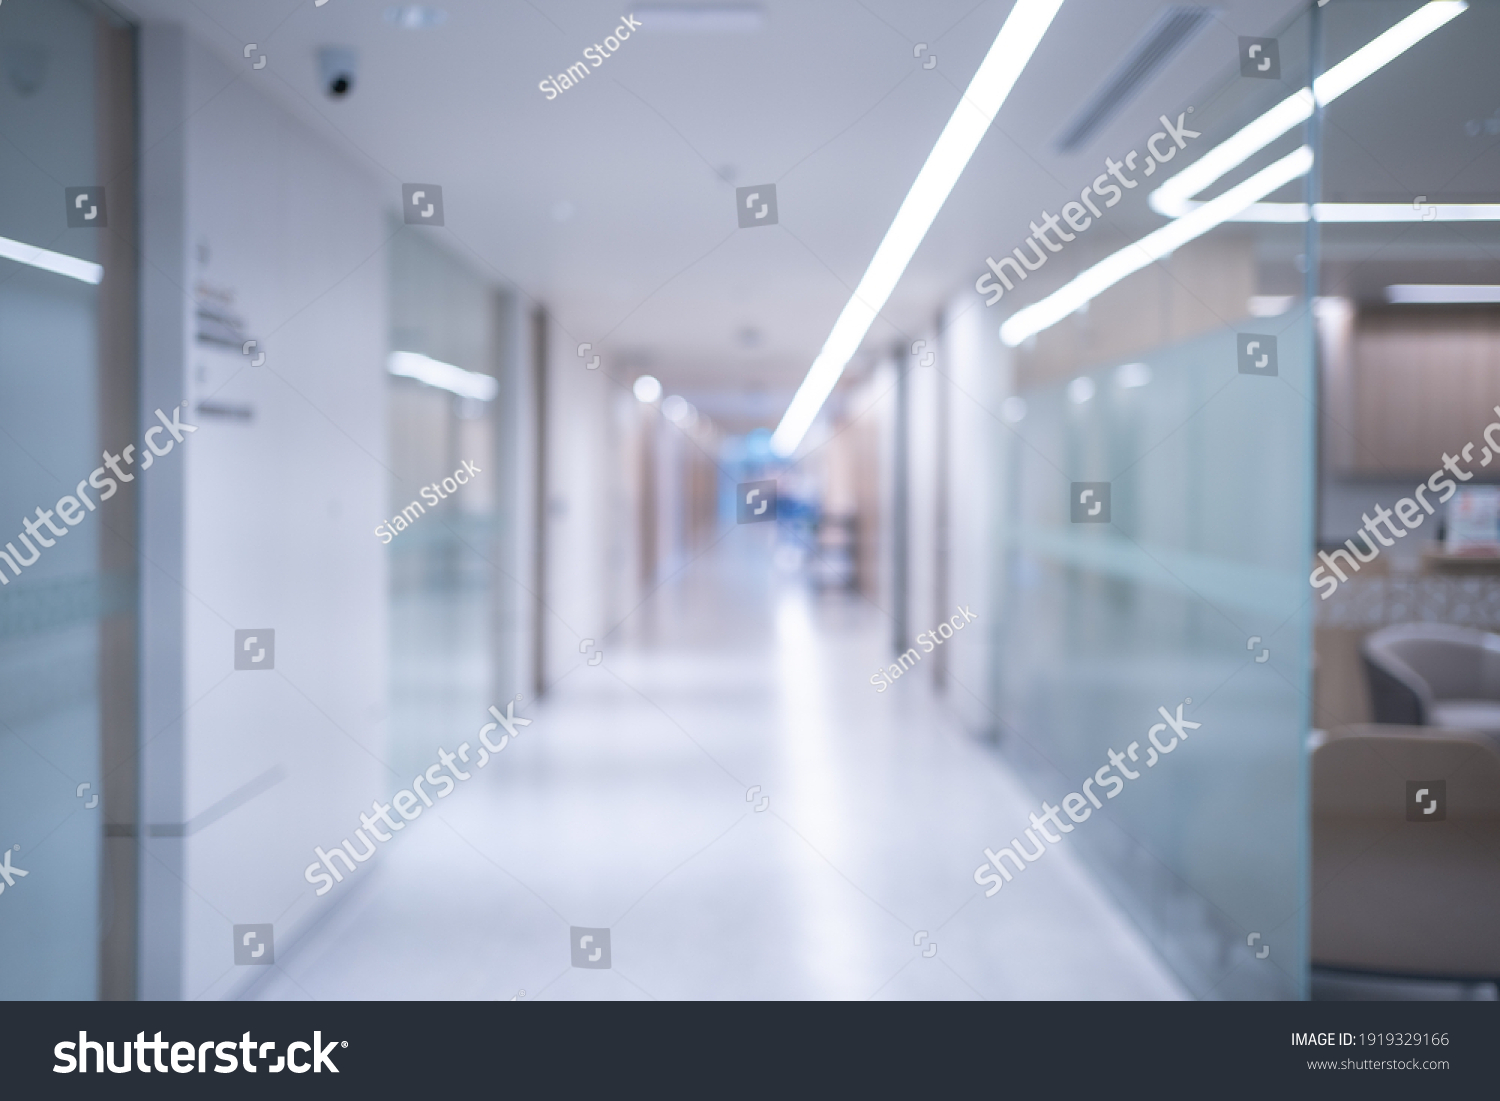 Blurred background of an interior of a modern hospital with an empty long corridor, there are treatment rooms and waiting room for patients and families between the corridor with bright white lights. #1919329166